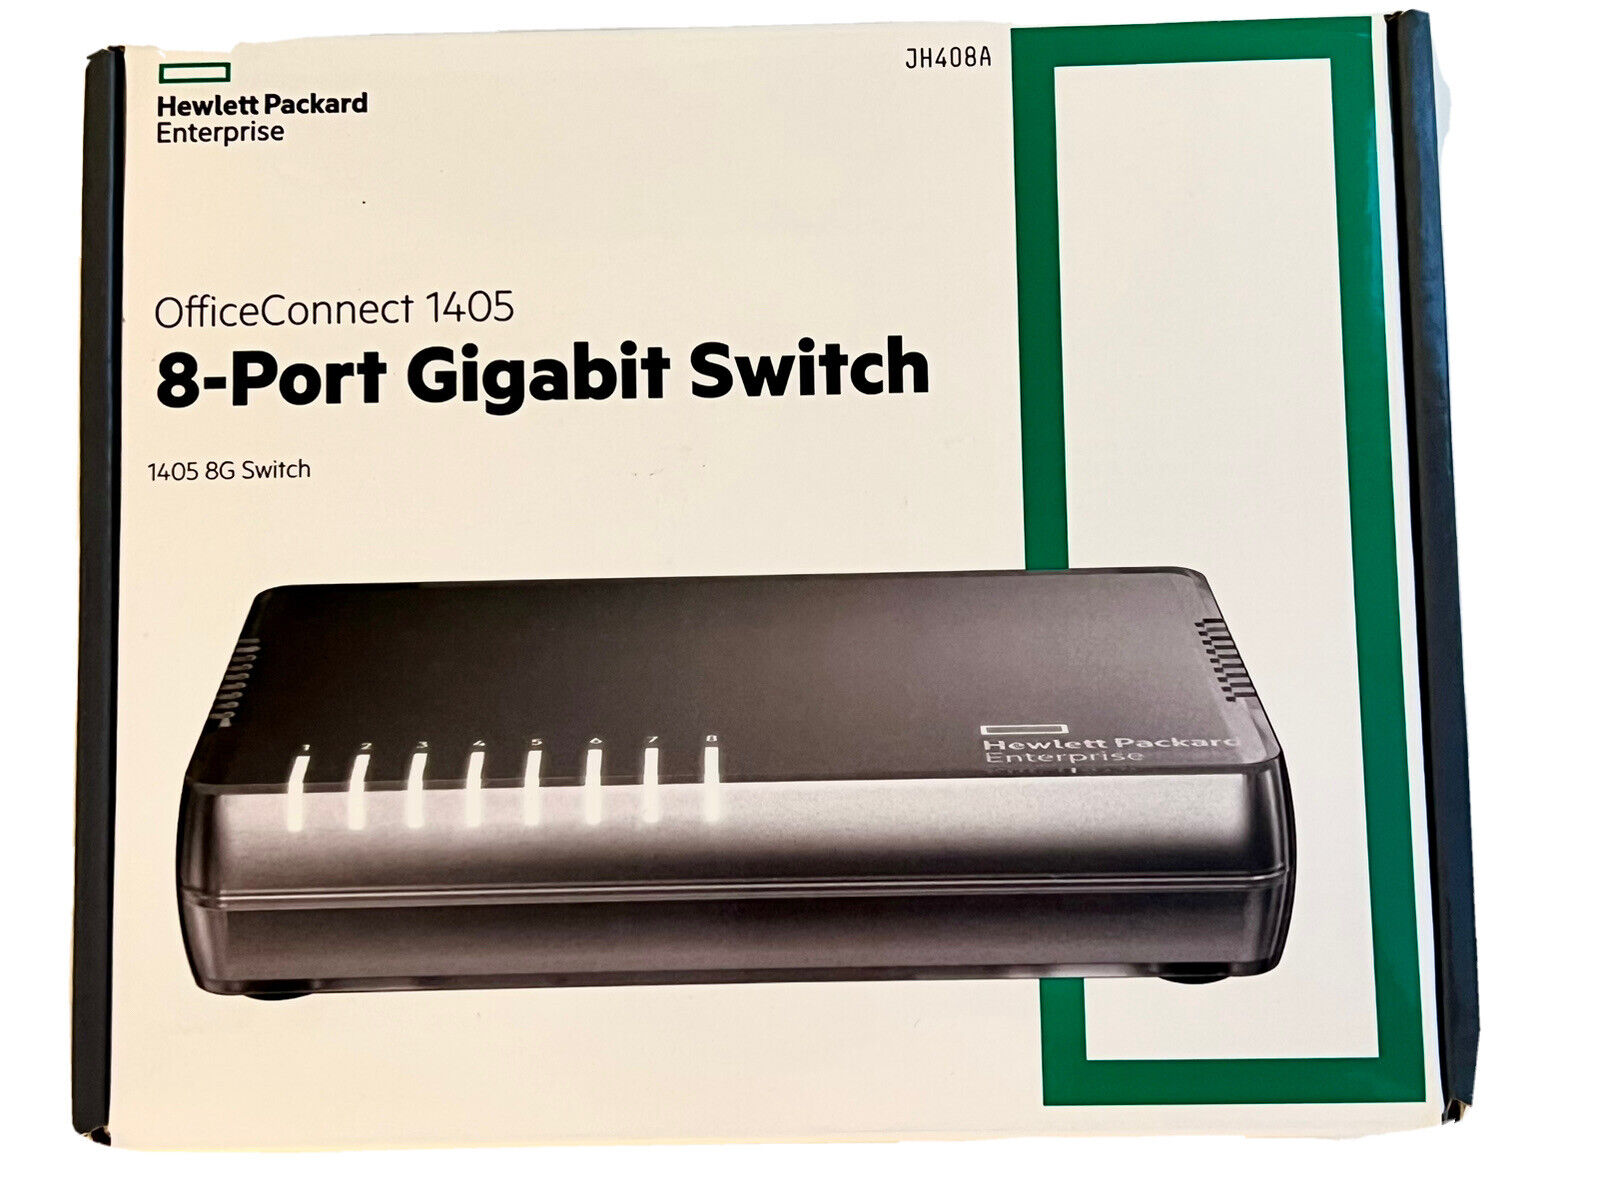 HP OfficeConnect 1405 8G v3 Switch, 8 GbE Ports, (JH408A#ABA) Enterprise